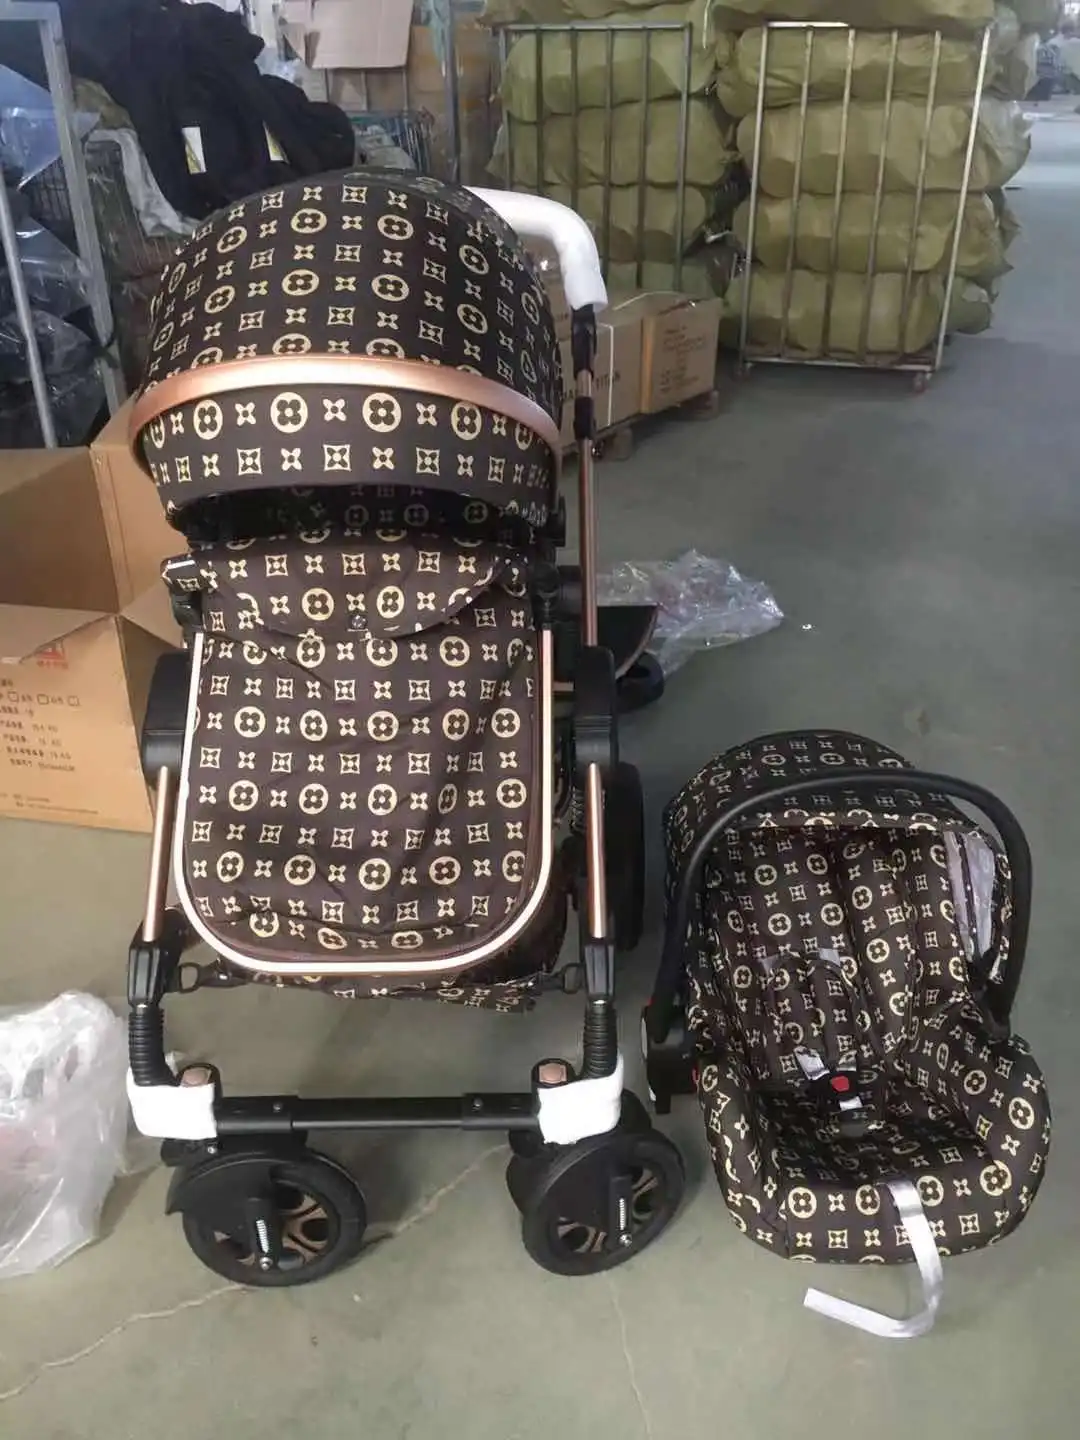 Free Louis Vuitton with 3 In 1 Baby Stroller New for Sale in Wht